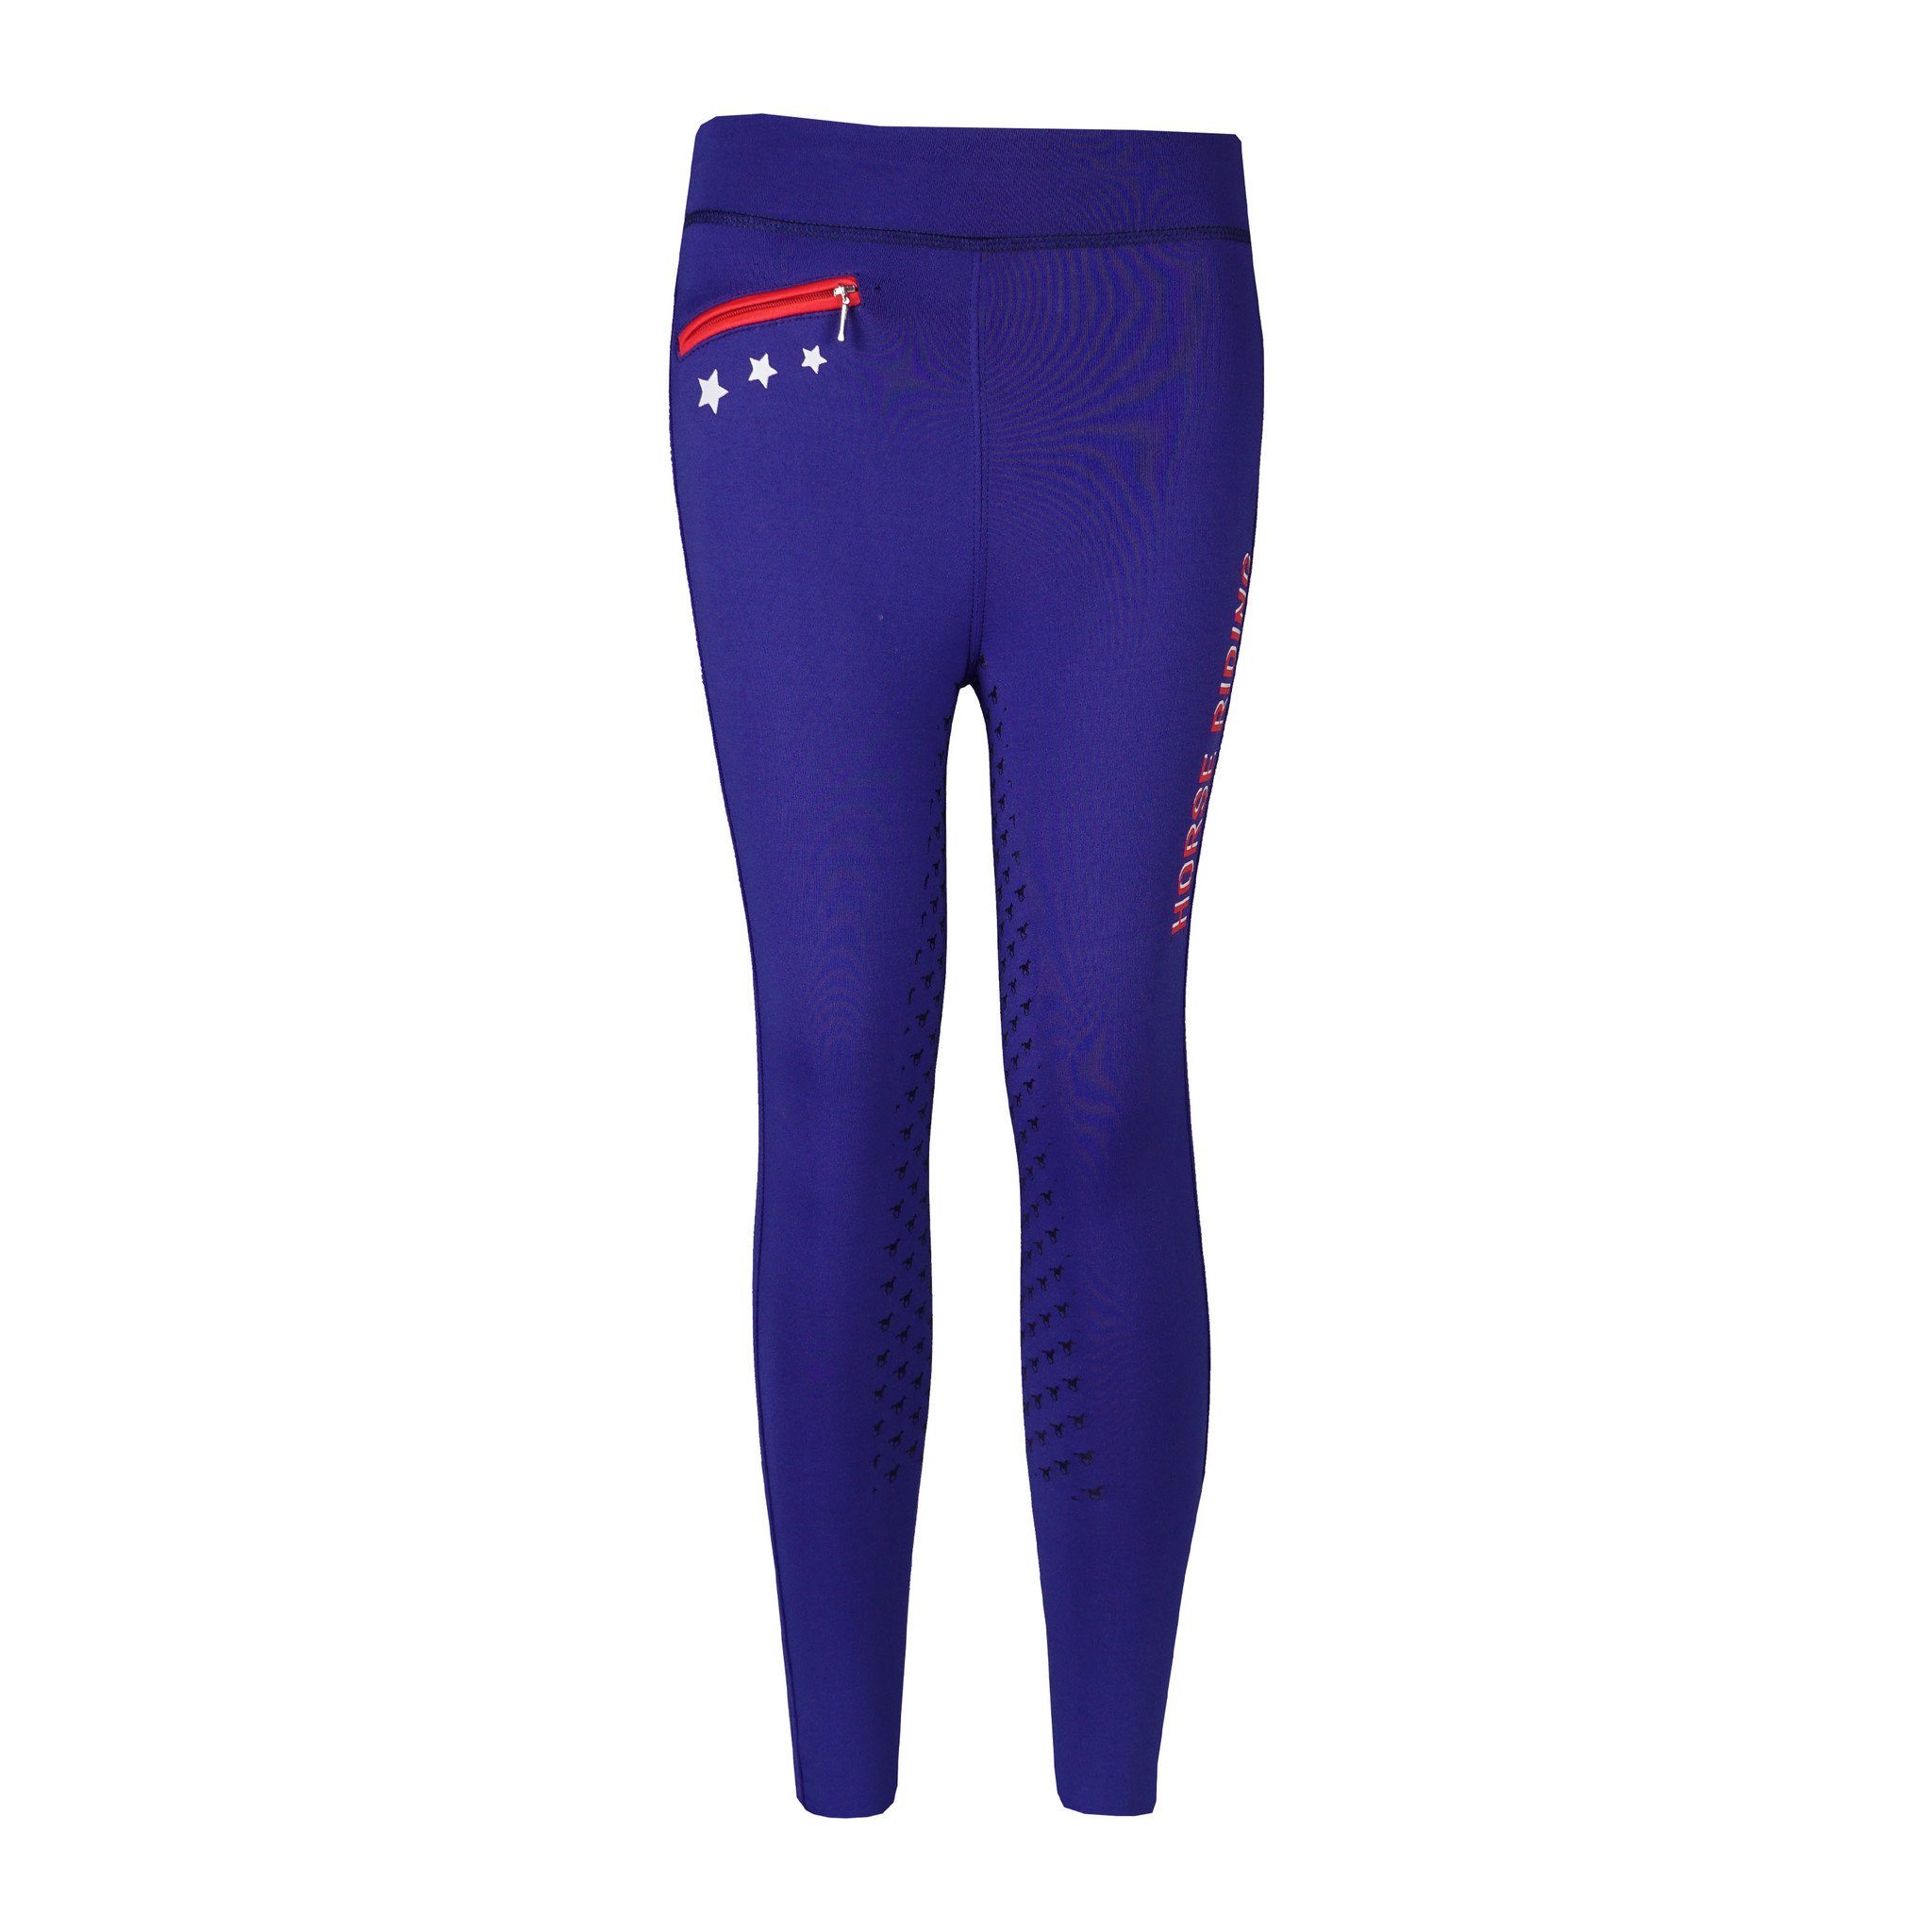 COVALLIERO SS23 KIDS RIDING TIGHTS, Dark Navy - Forever Equestrian Tack and  Clothing Store